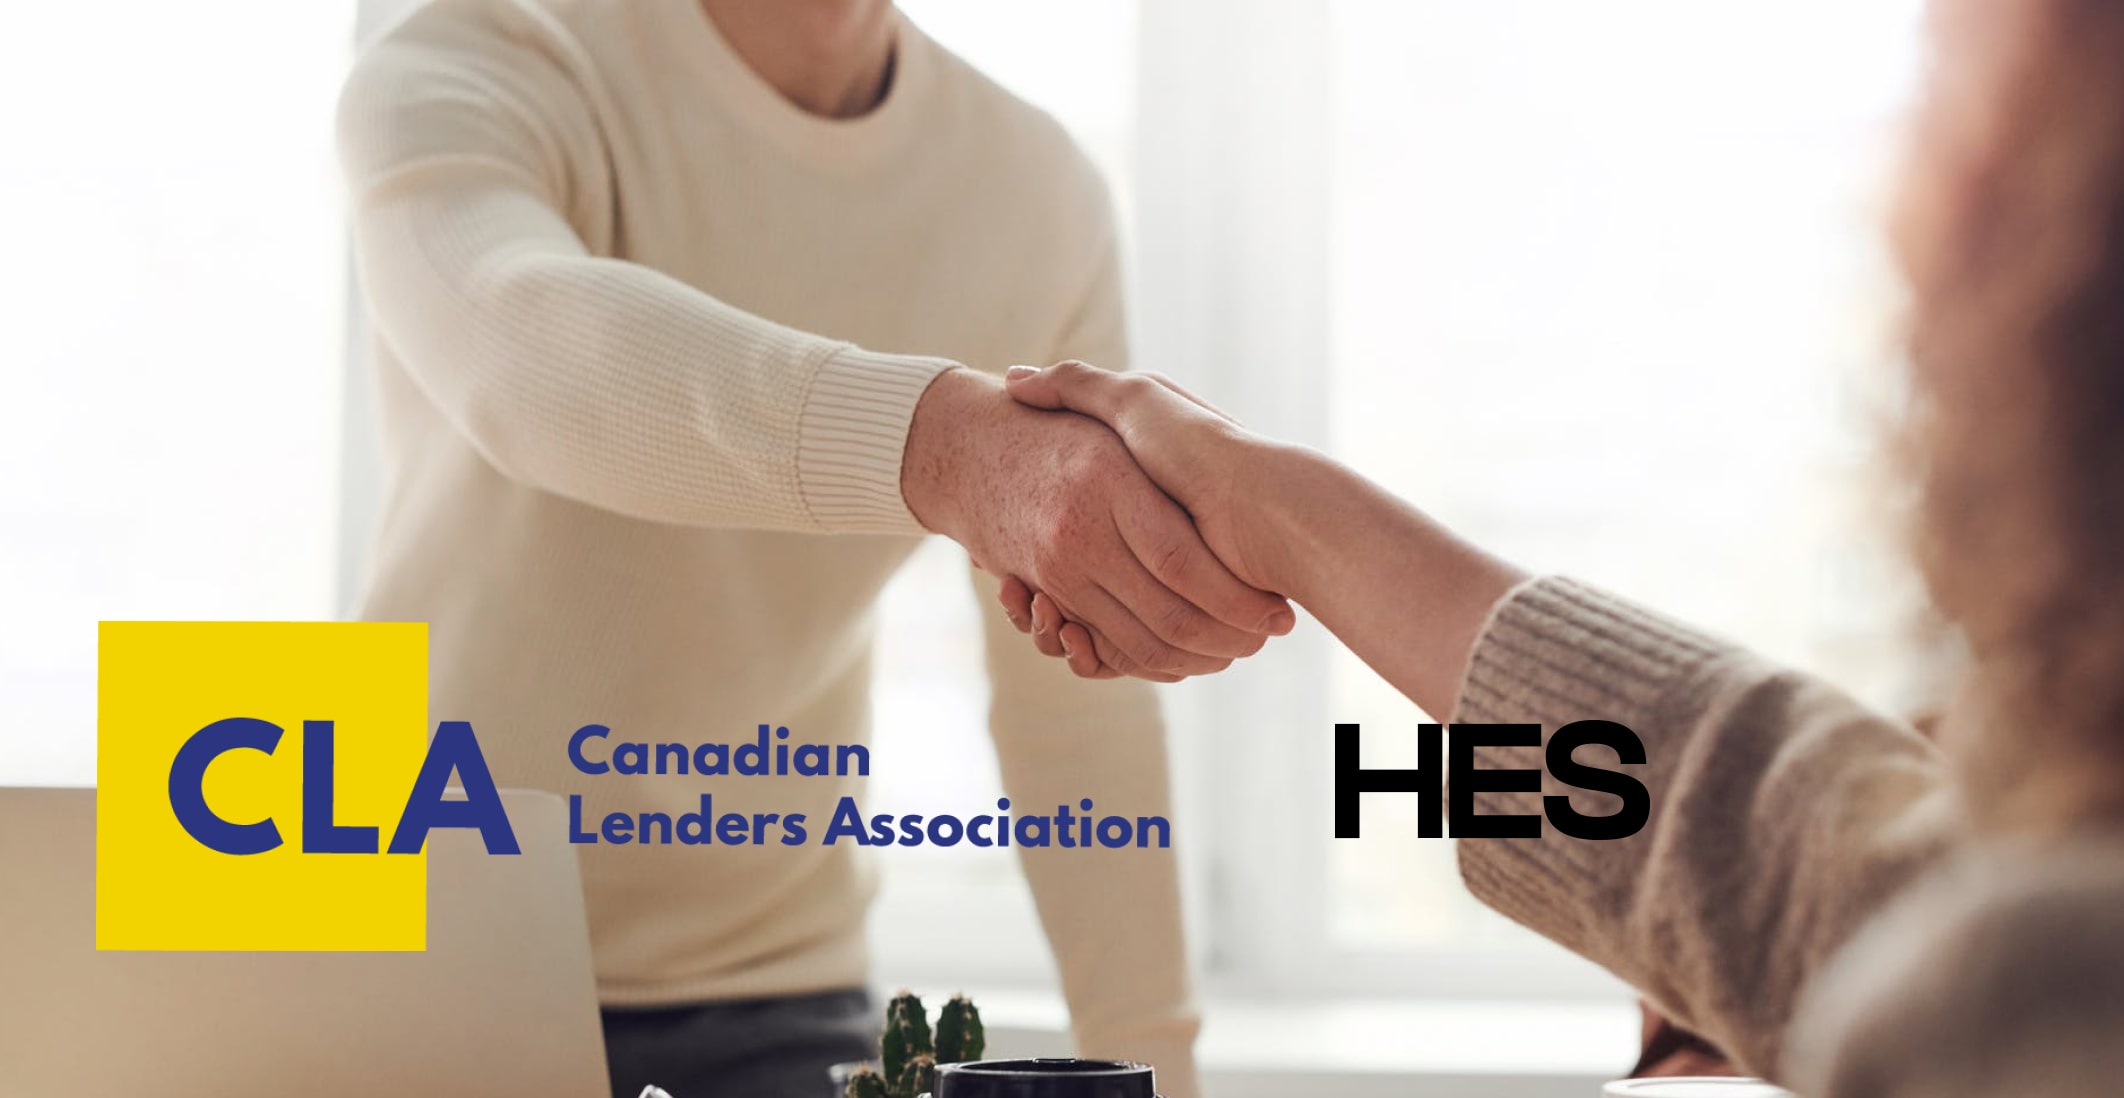 HES FinTech and Canadian Lenders Association Partnership